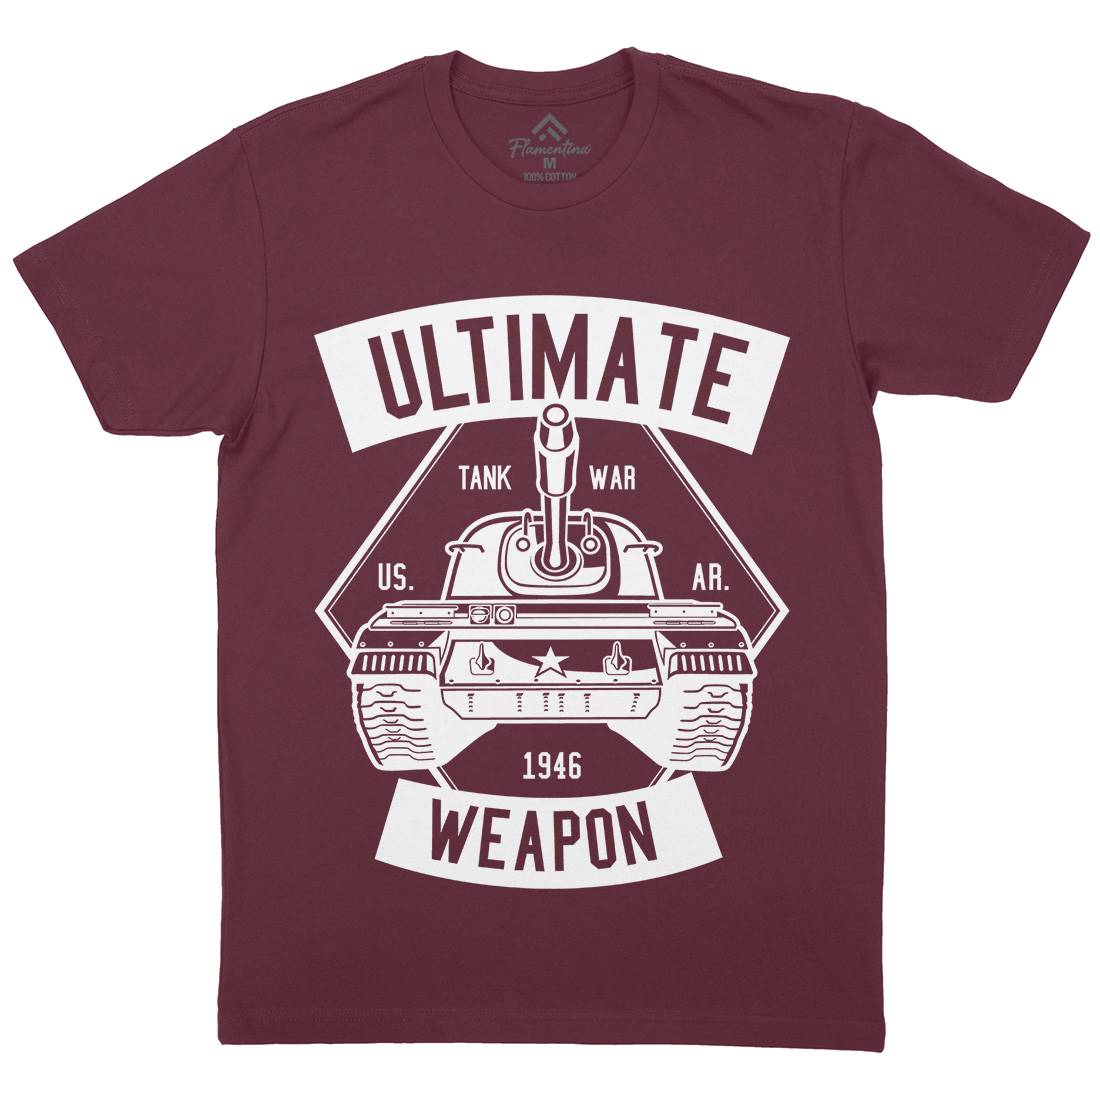 Tank War Ultimate Weapon Mens Crew Neck T-Shirt Army B649